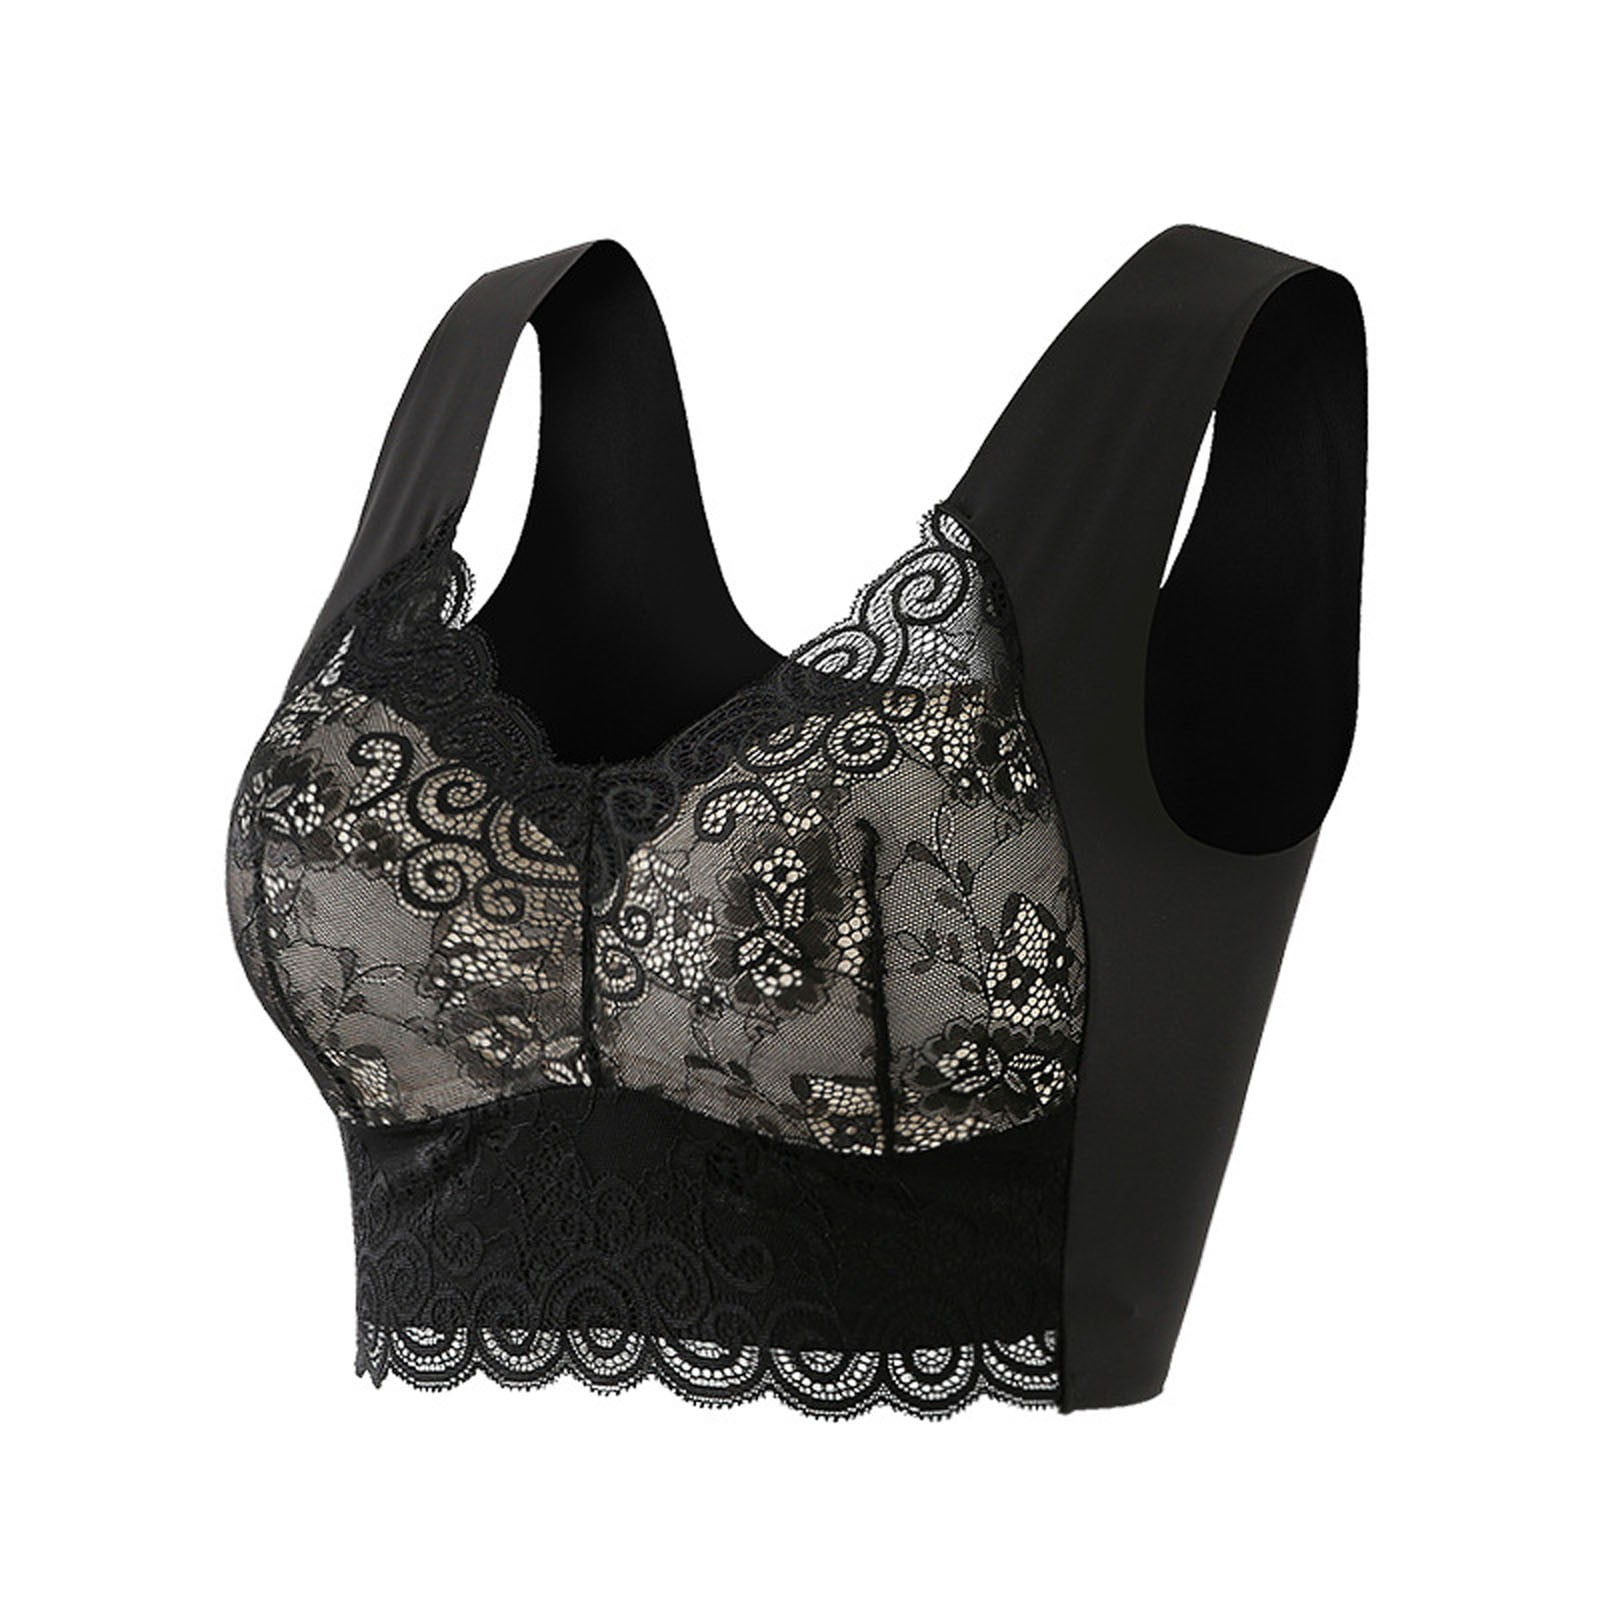 US Women Sheer Floral Lace Push Up Bra Top Open Cup Bralette